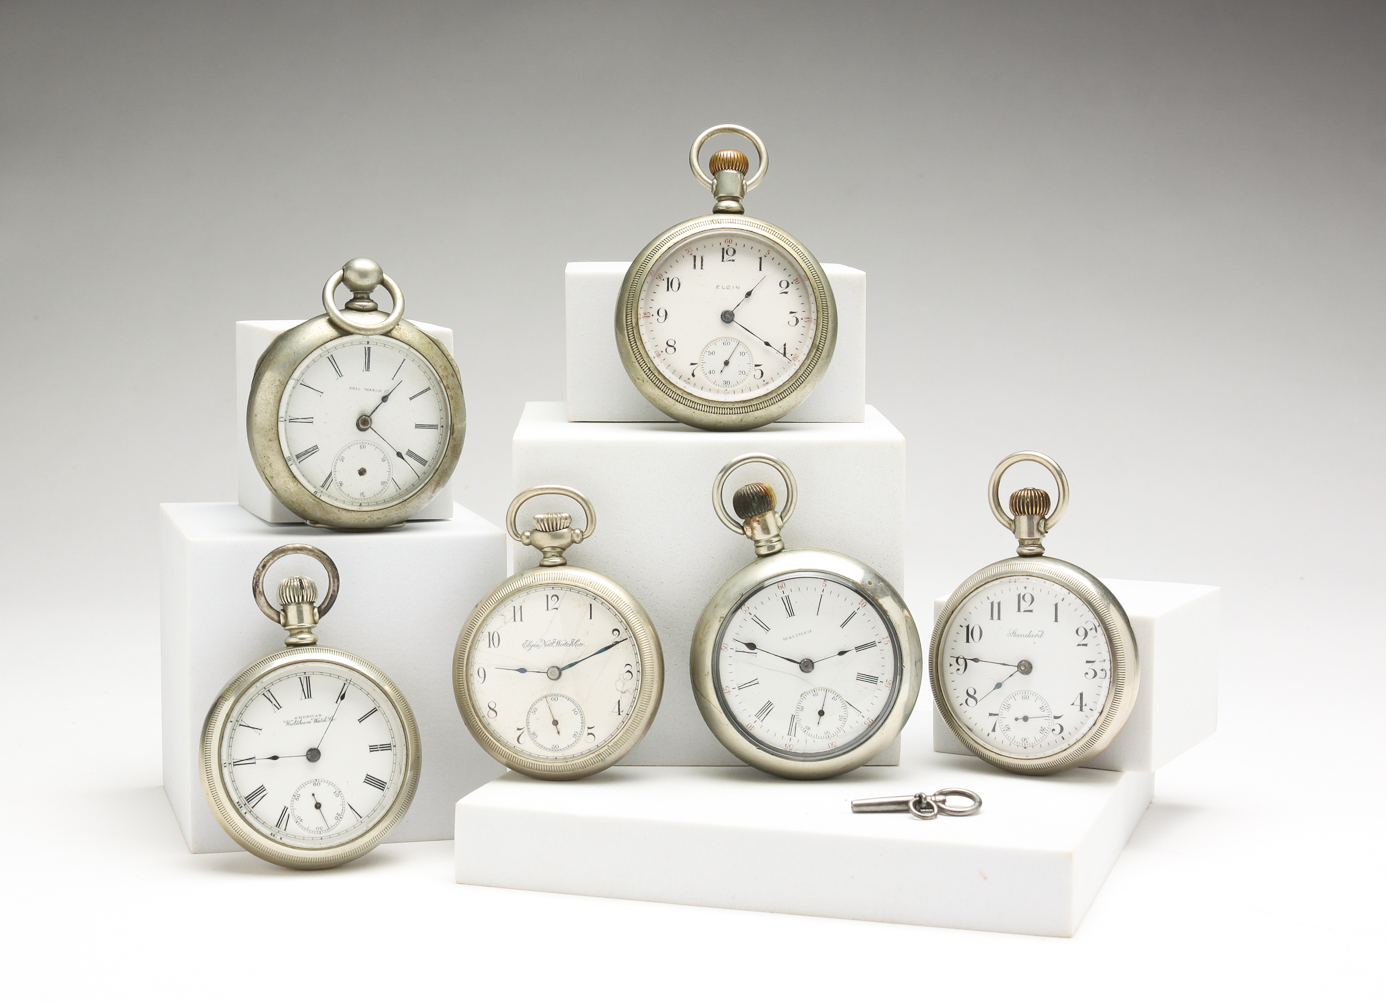 SIX AMERICAN 18 SIZE POCKET WATCHES.